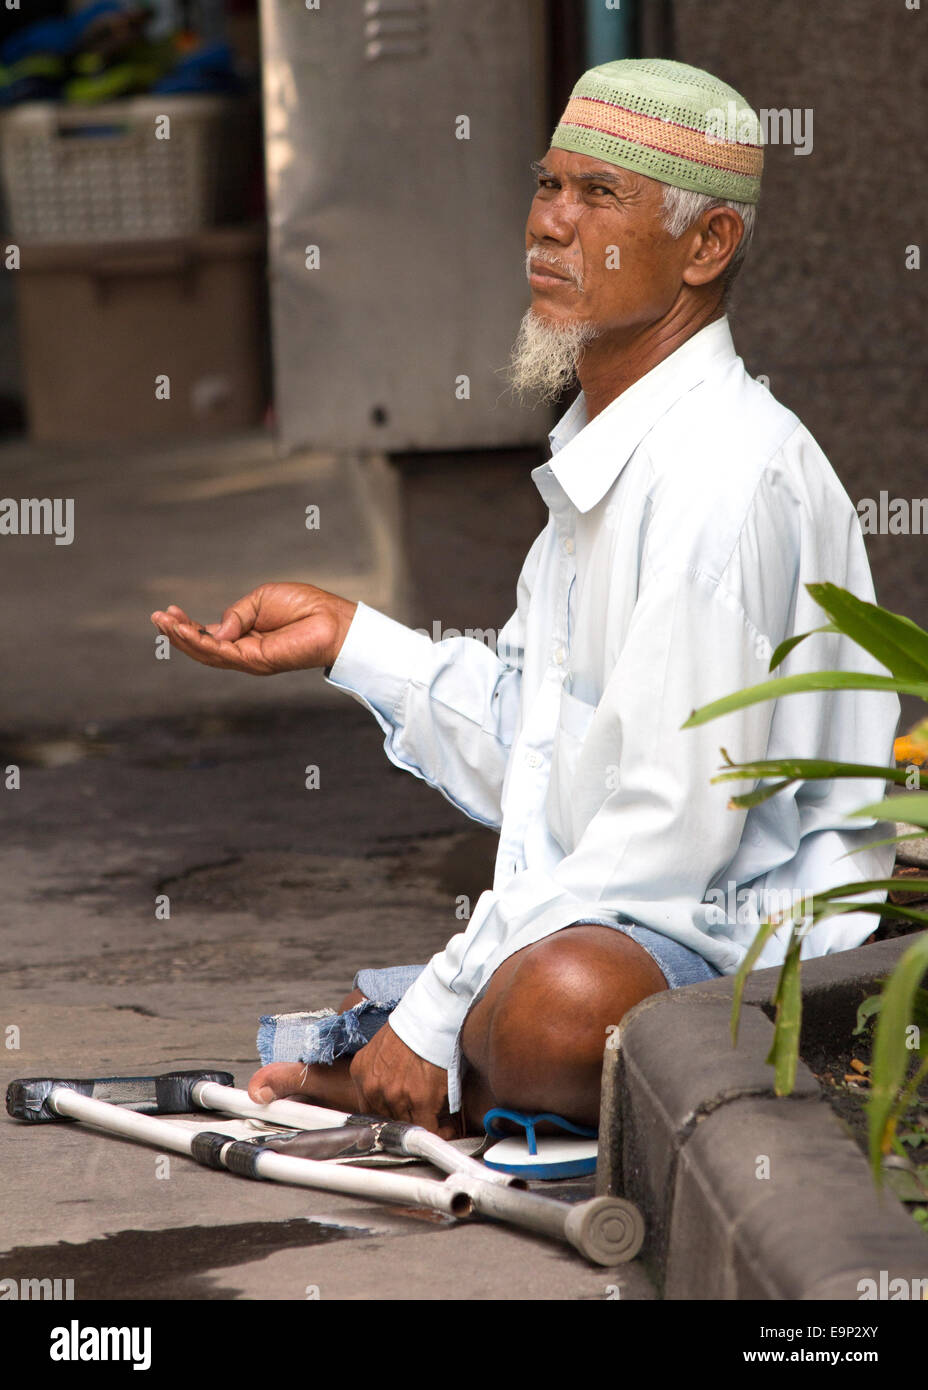 Man with one leg begging in the street. There are many beggars in and around central Bangkok Stock Photo